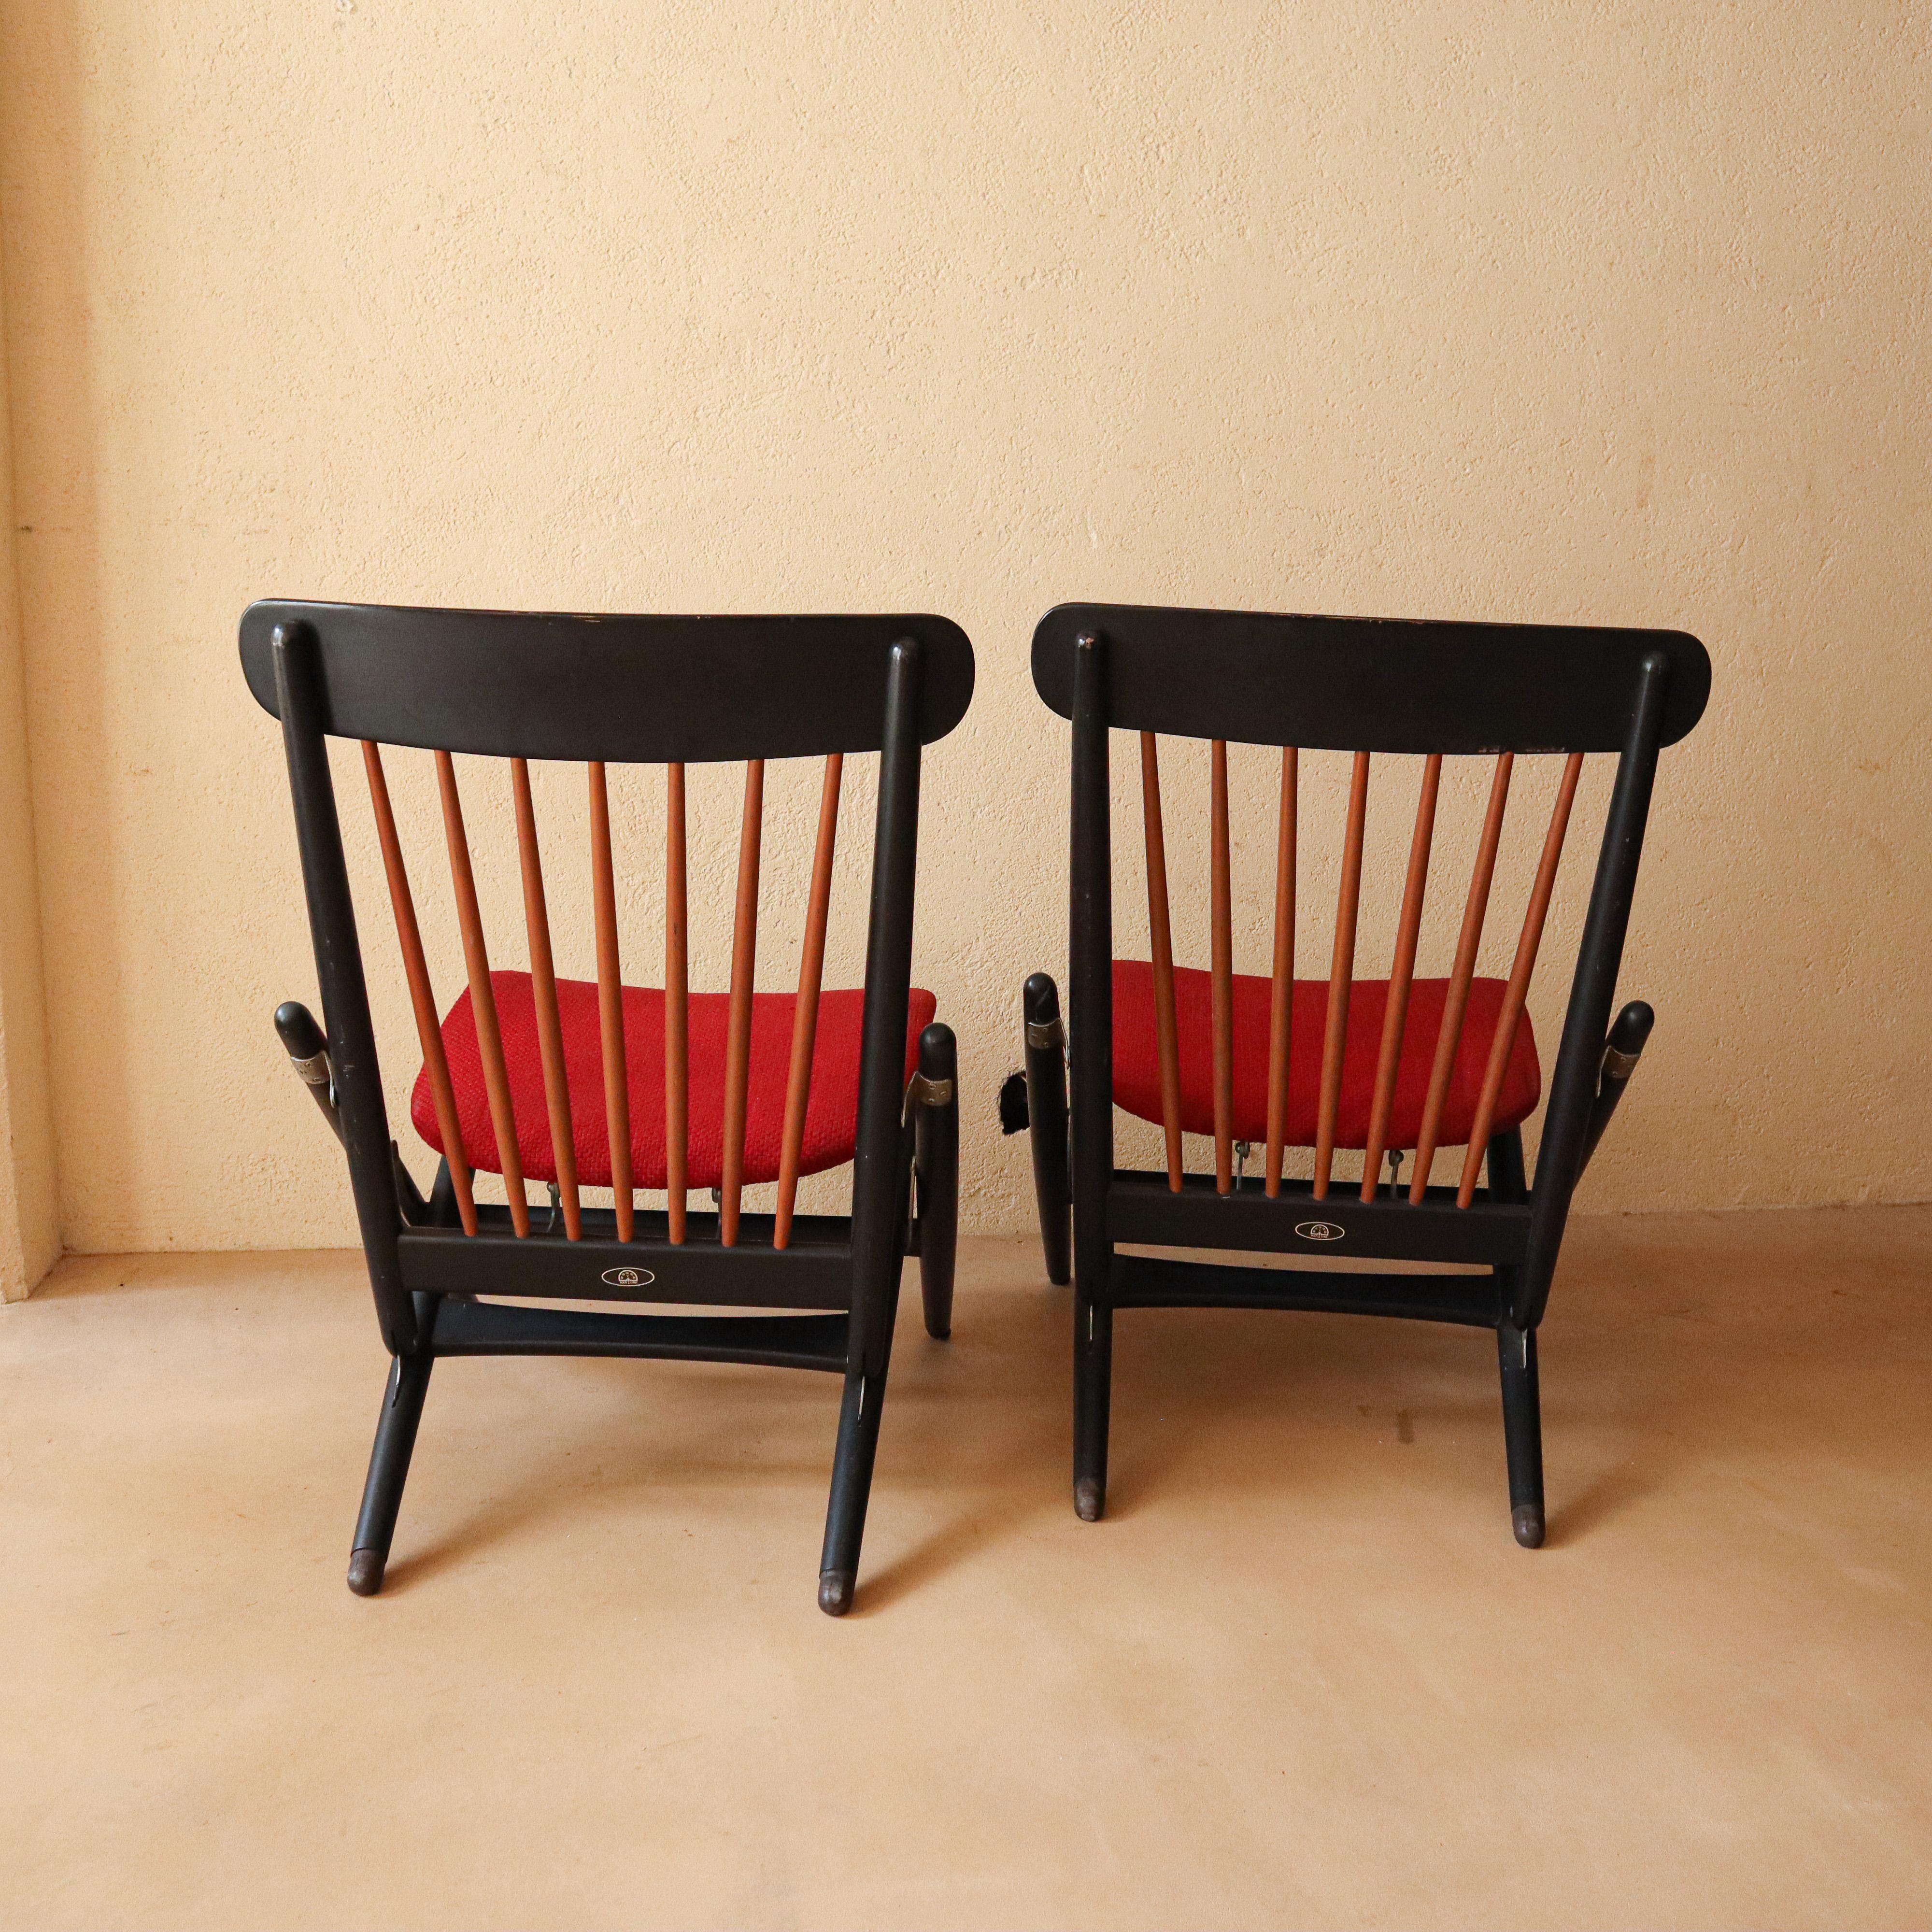 Japanese Midcentury Rare Pair of Maruni Folding Lounge Chairs In Good Condition For Sale In 神戸市, JP